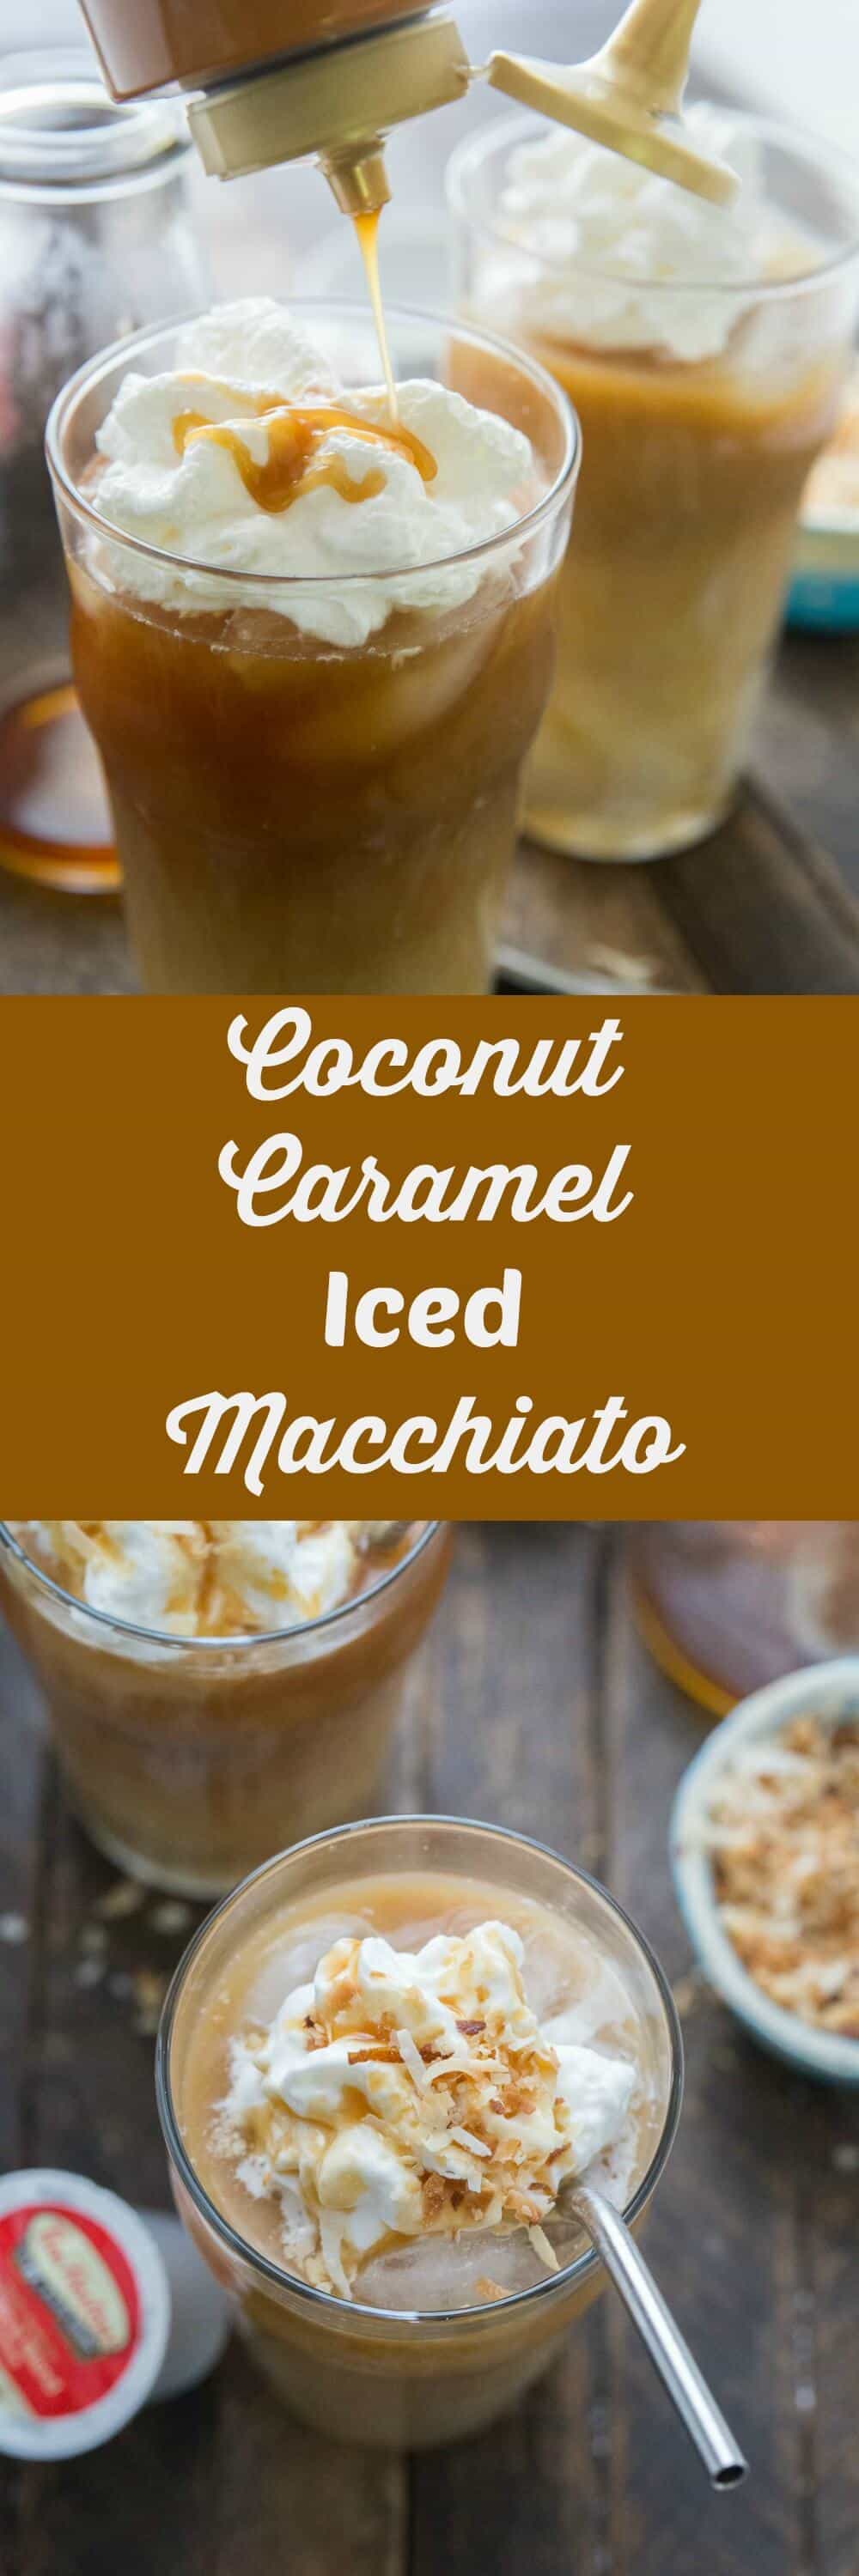 Nothing beats a refreshing iced macchiato. This coconut caramel is sweet and delicious! The best part is how simple it is to have a coffee house drink at home!